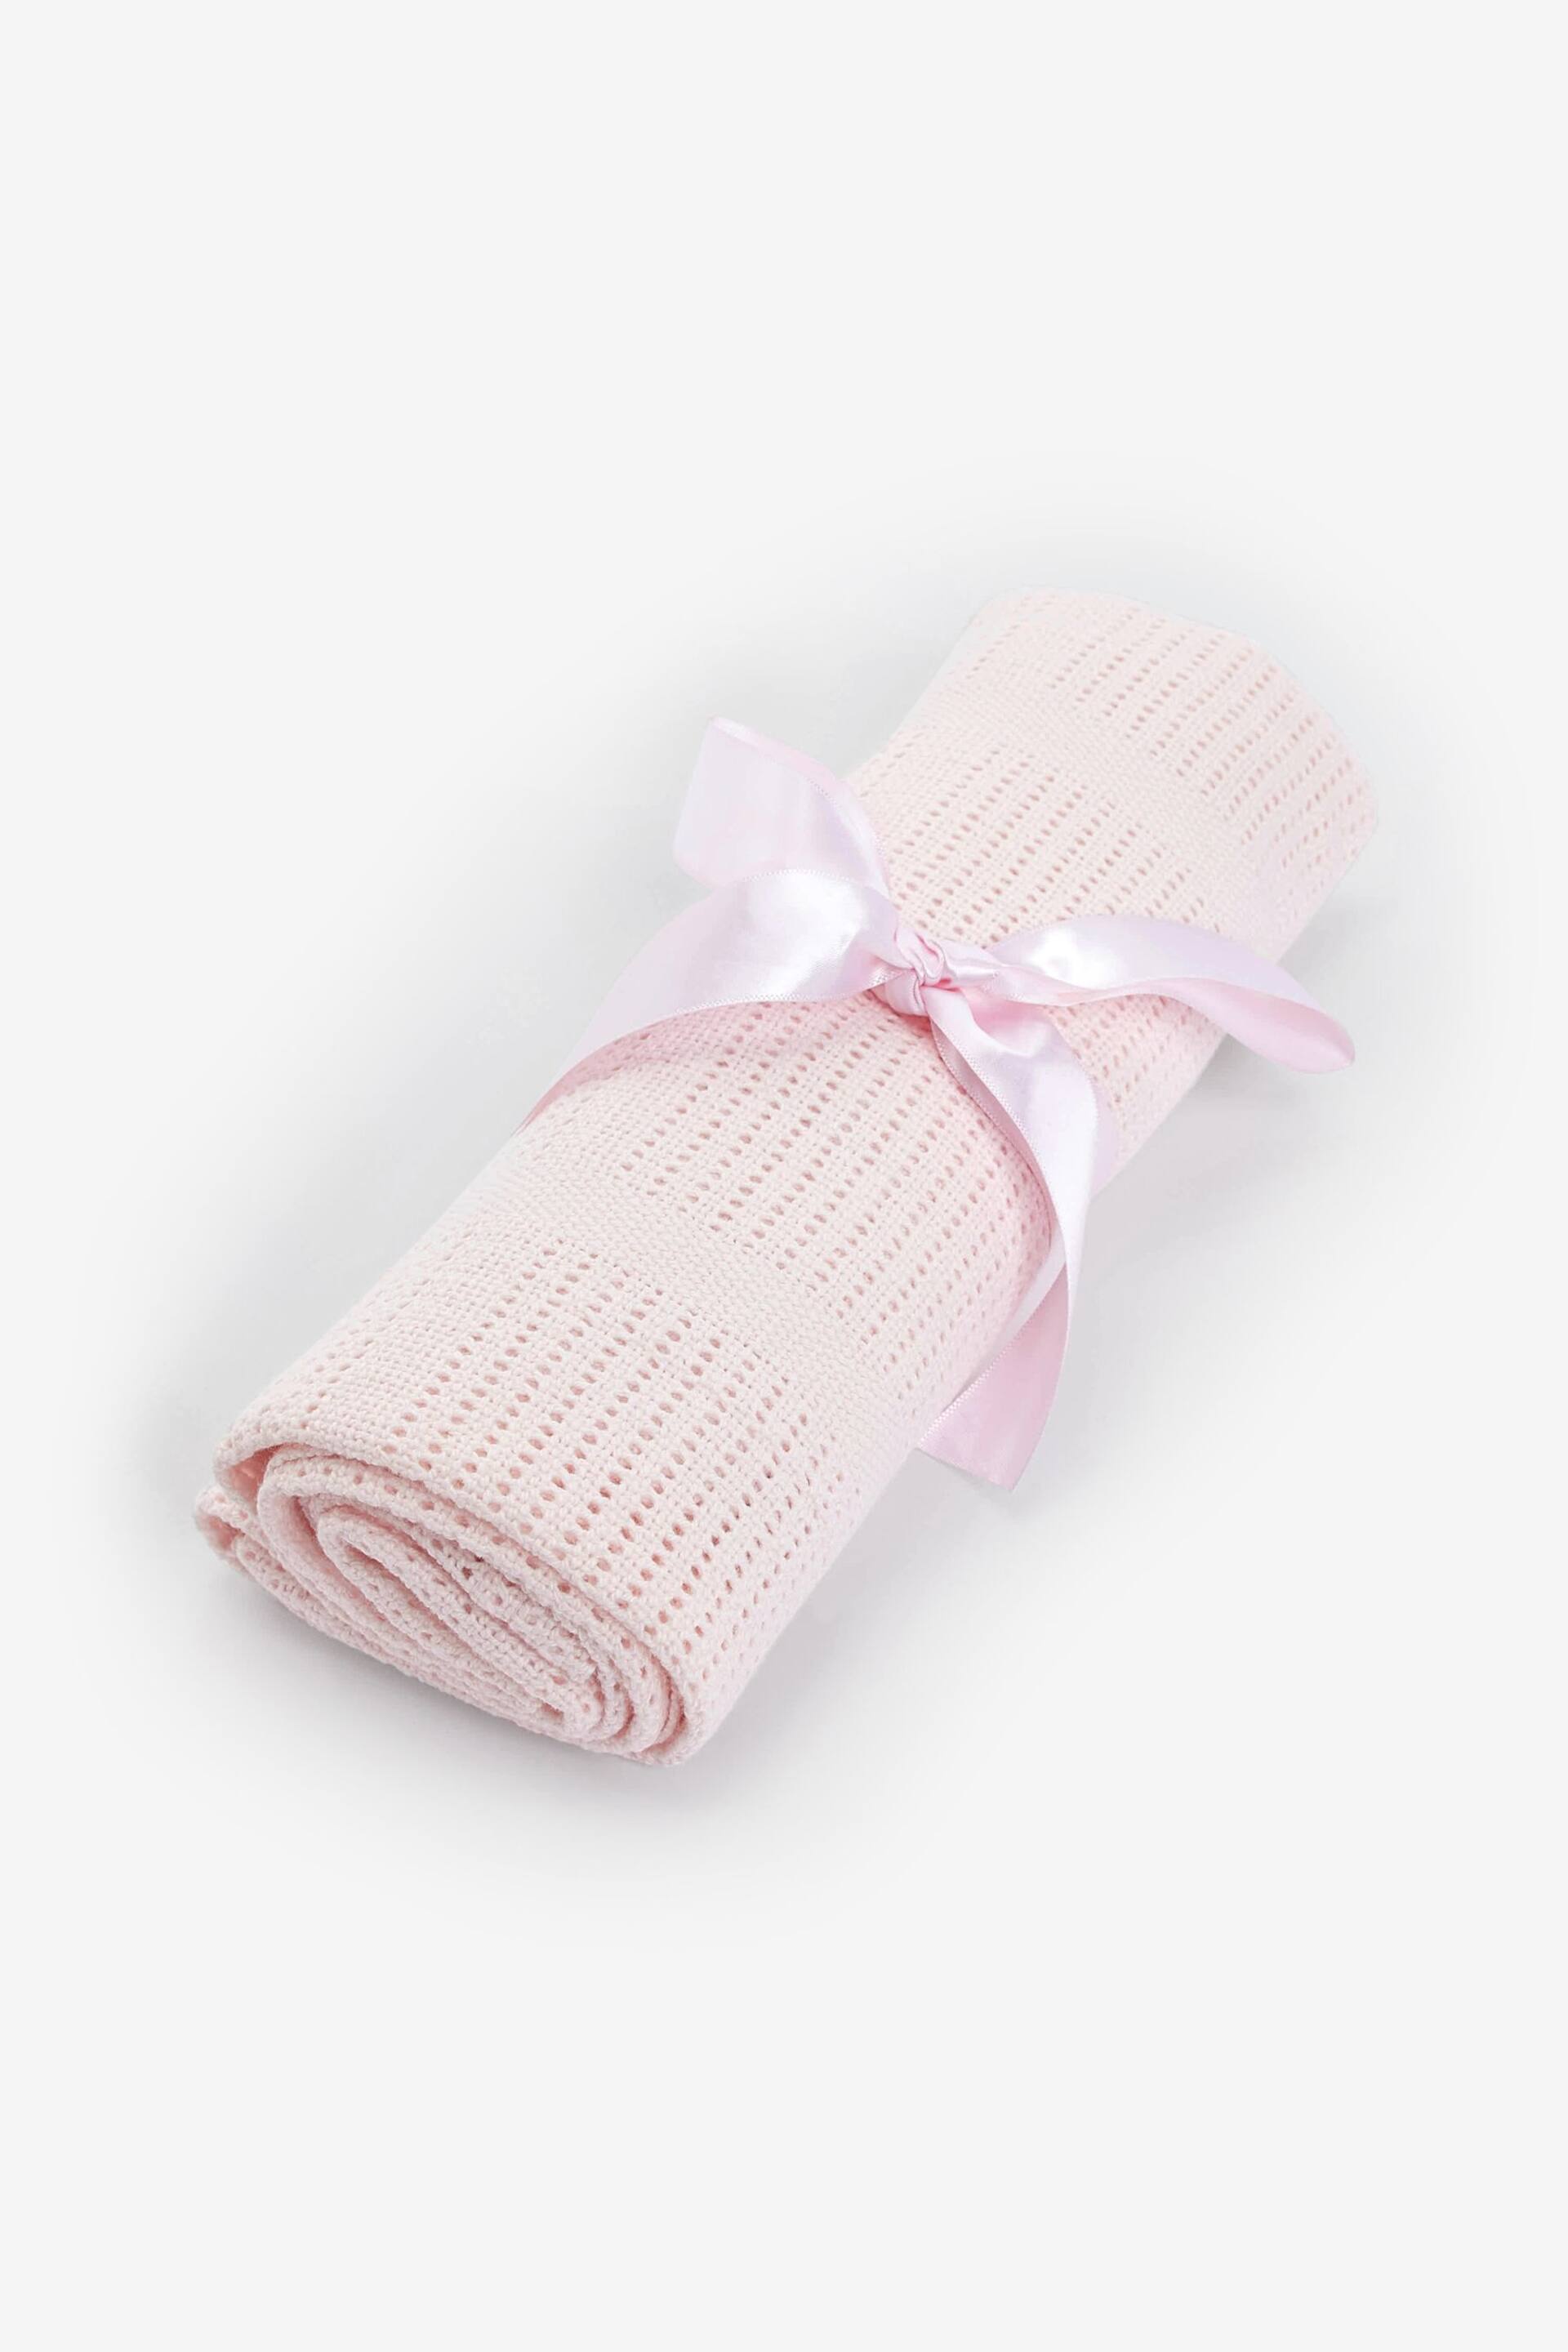 Pink Baby 100% Cotton Cellular Blanket - Image 6 of 7